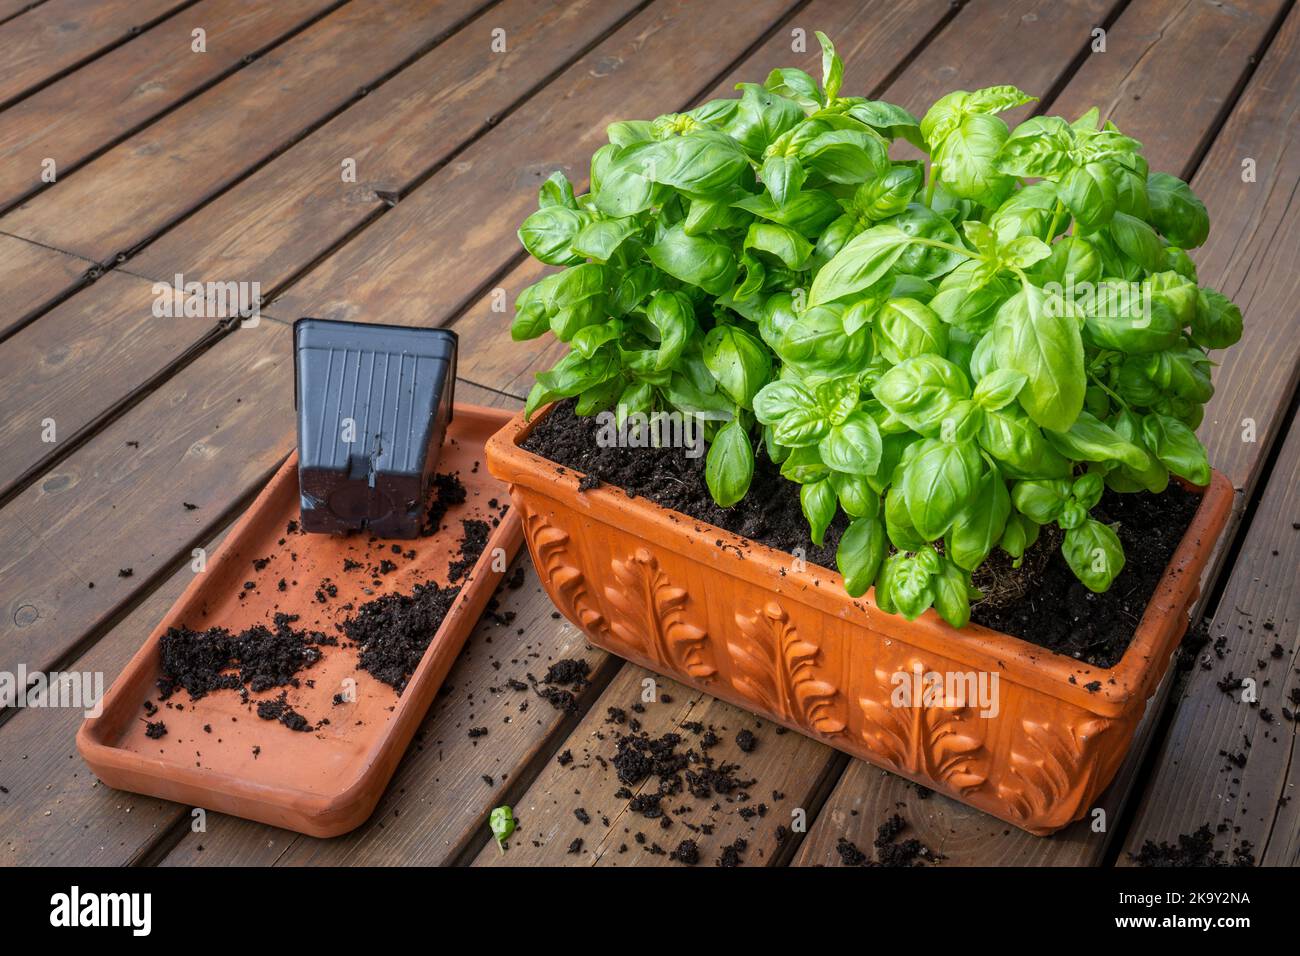 Planting basil for winter indoor growing. Stock Photo